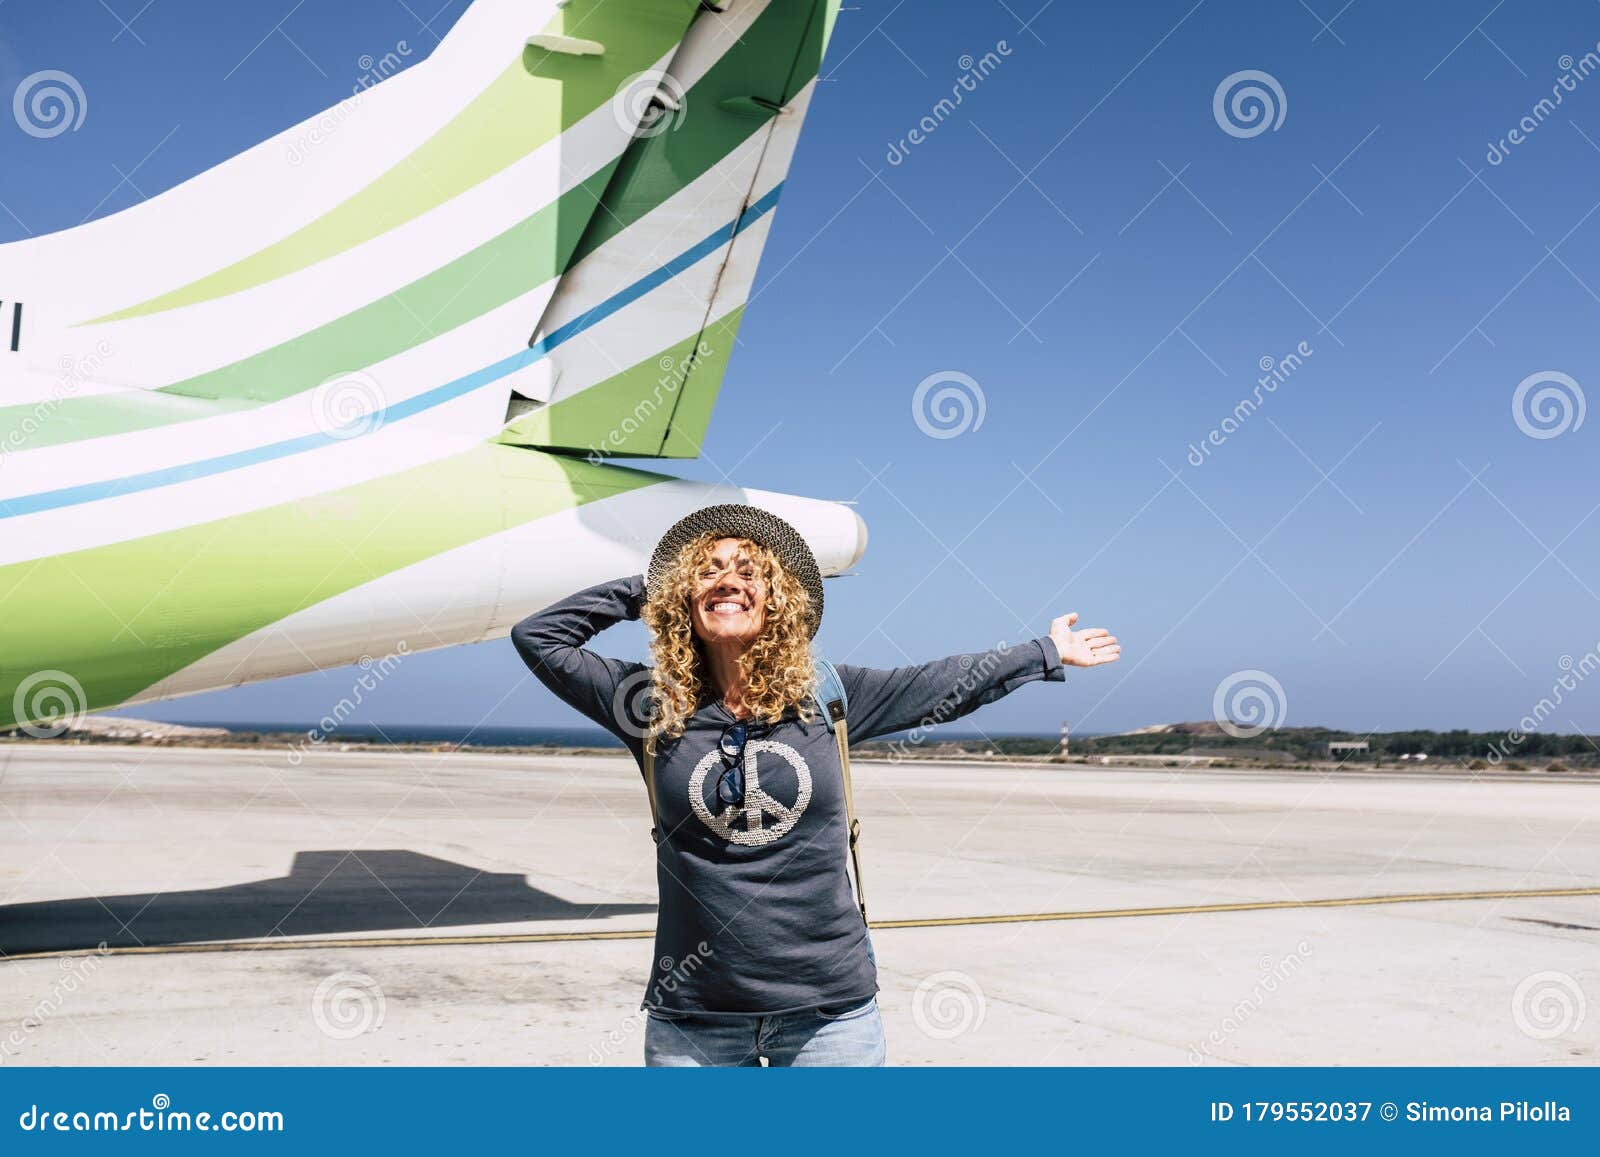 tourism and tourist travel happy people concept with cheerful and joyful adult beautiful woman ready to leave with the aircraft